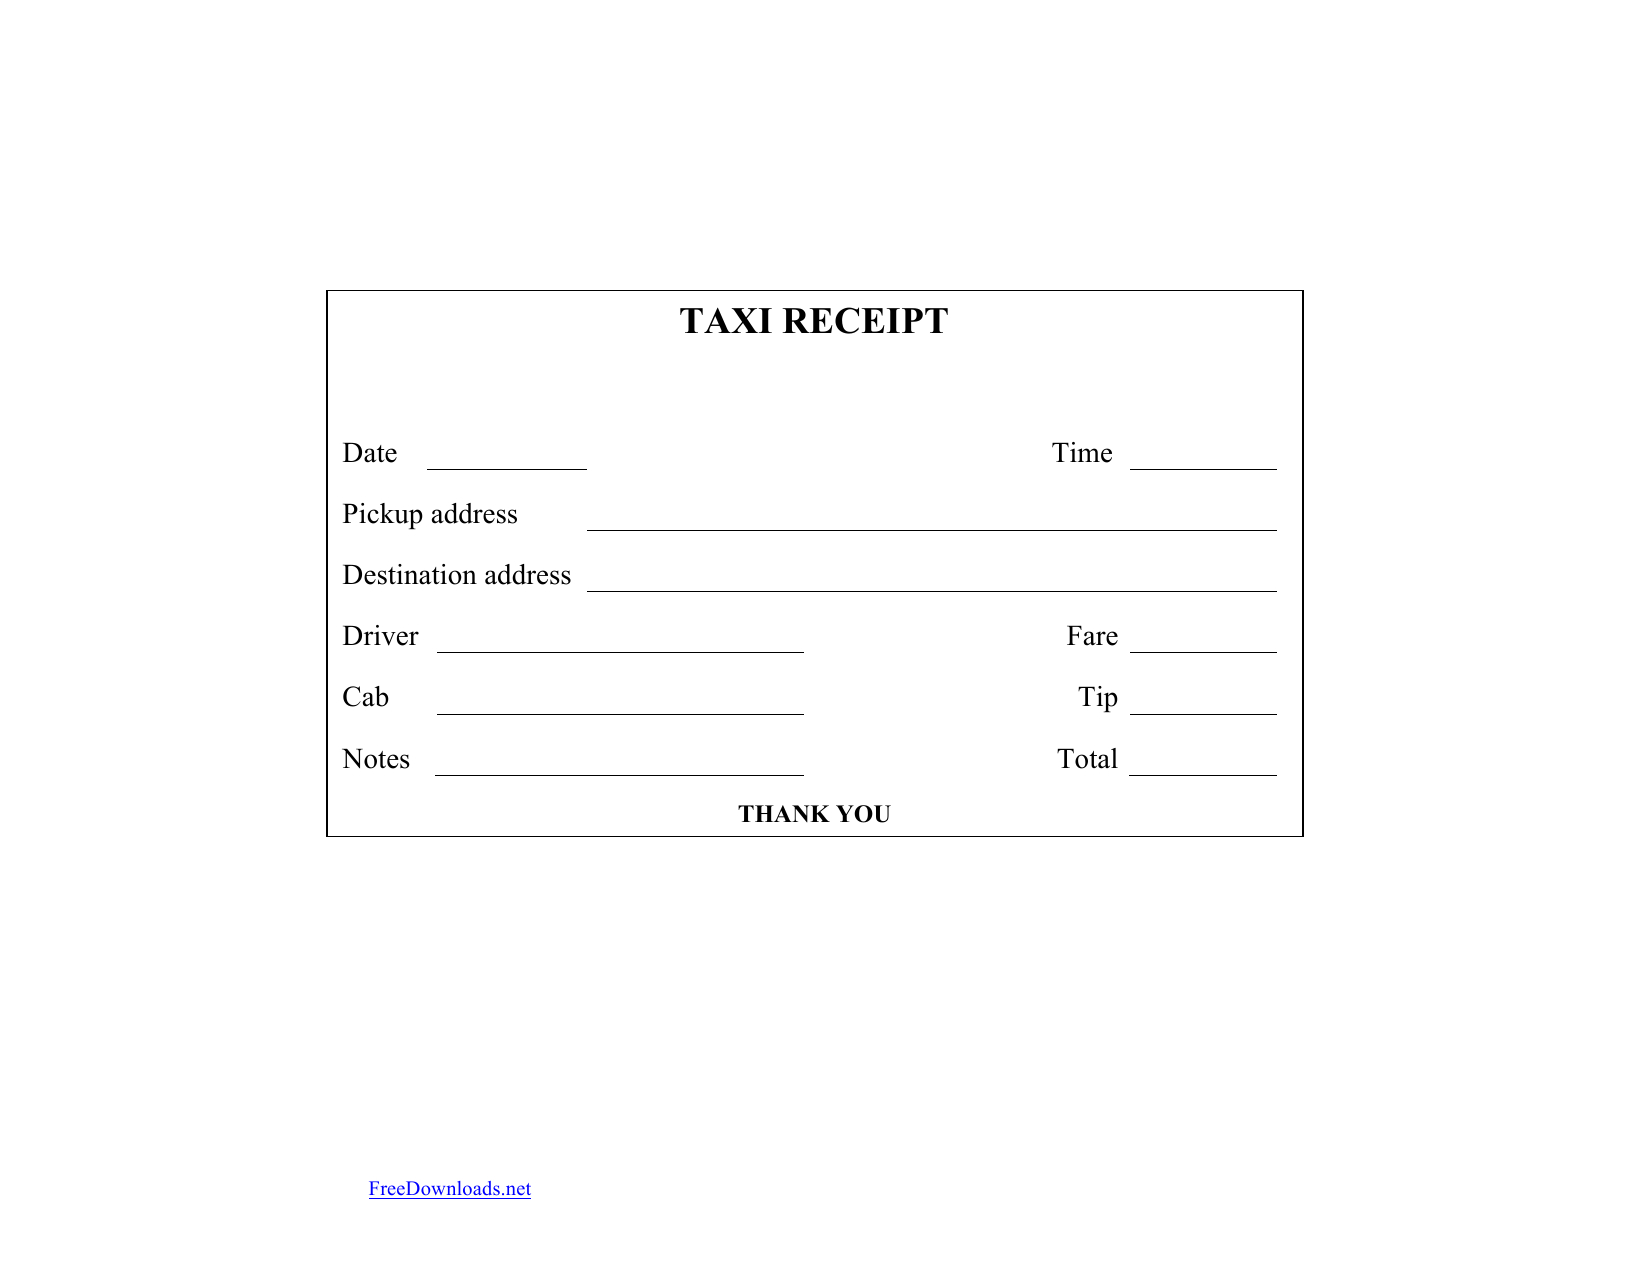 Taxi Receipt Pdf - Dalep.midnightpig.co Within Blank Taxi Receipt Template